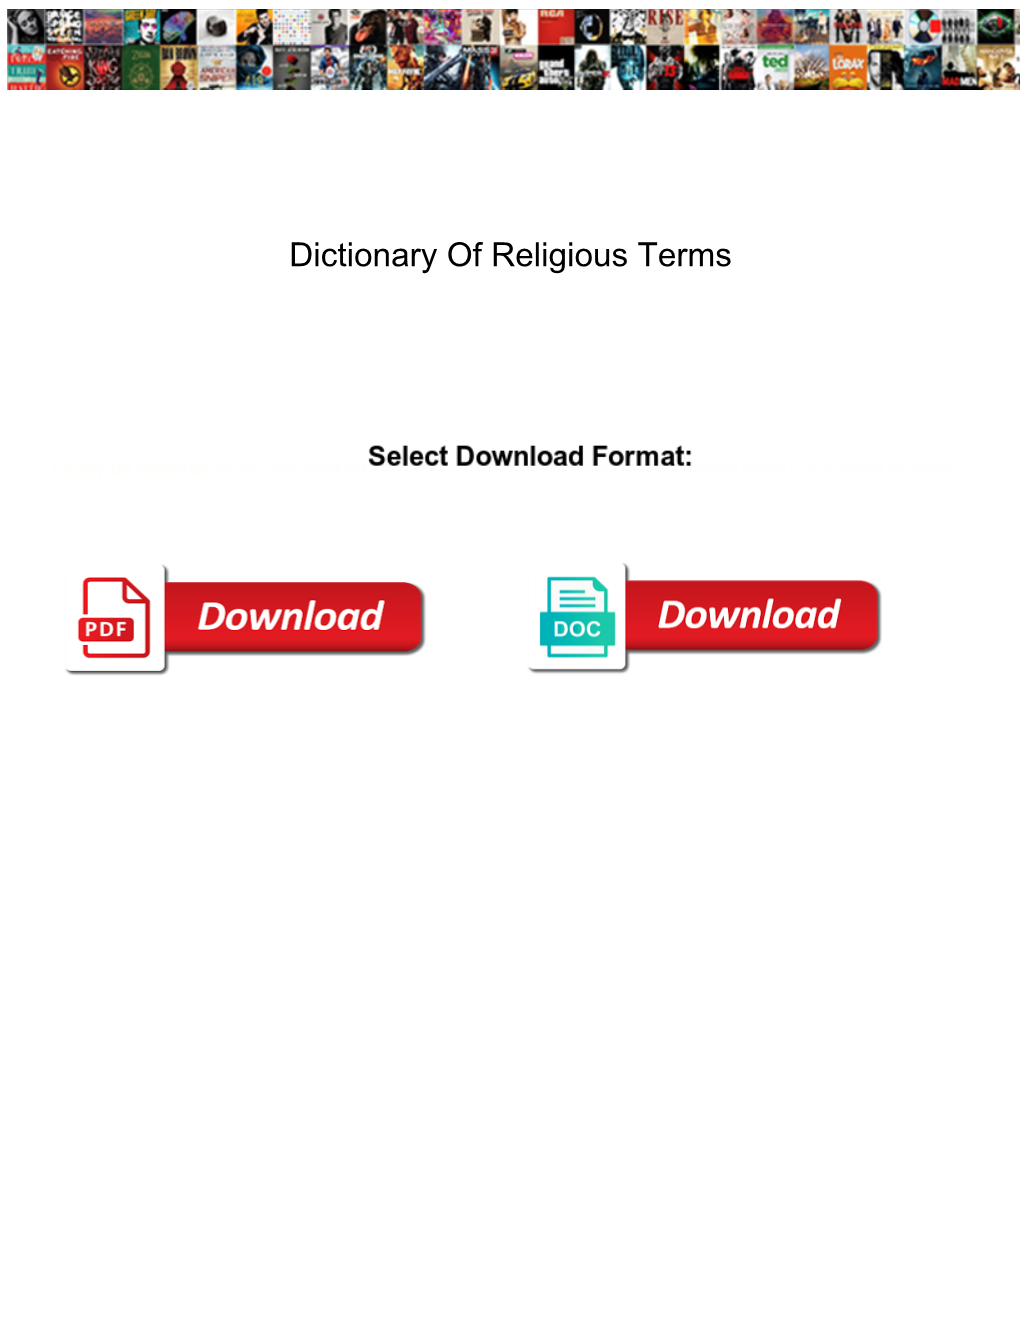 Dictionary of Religious Terms